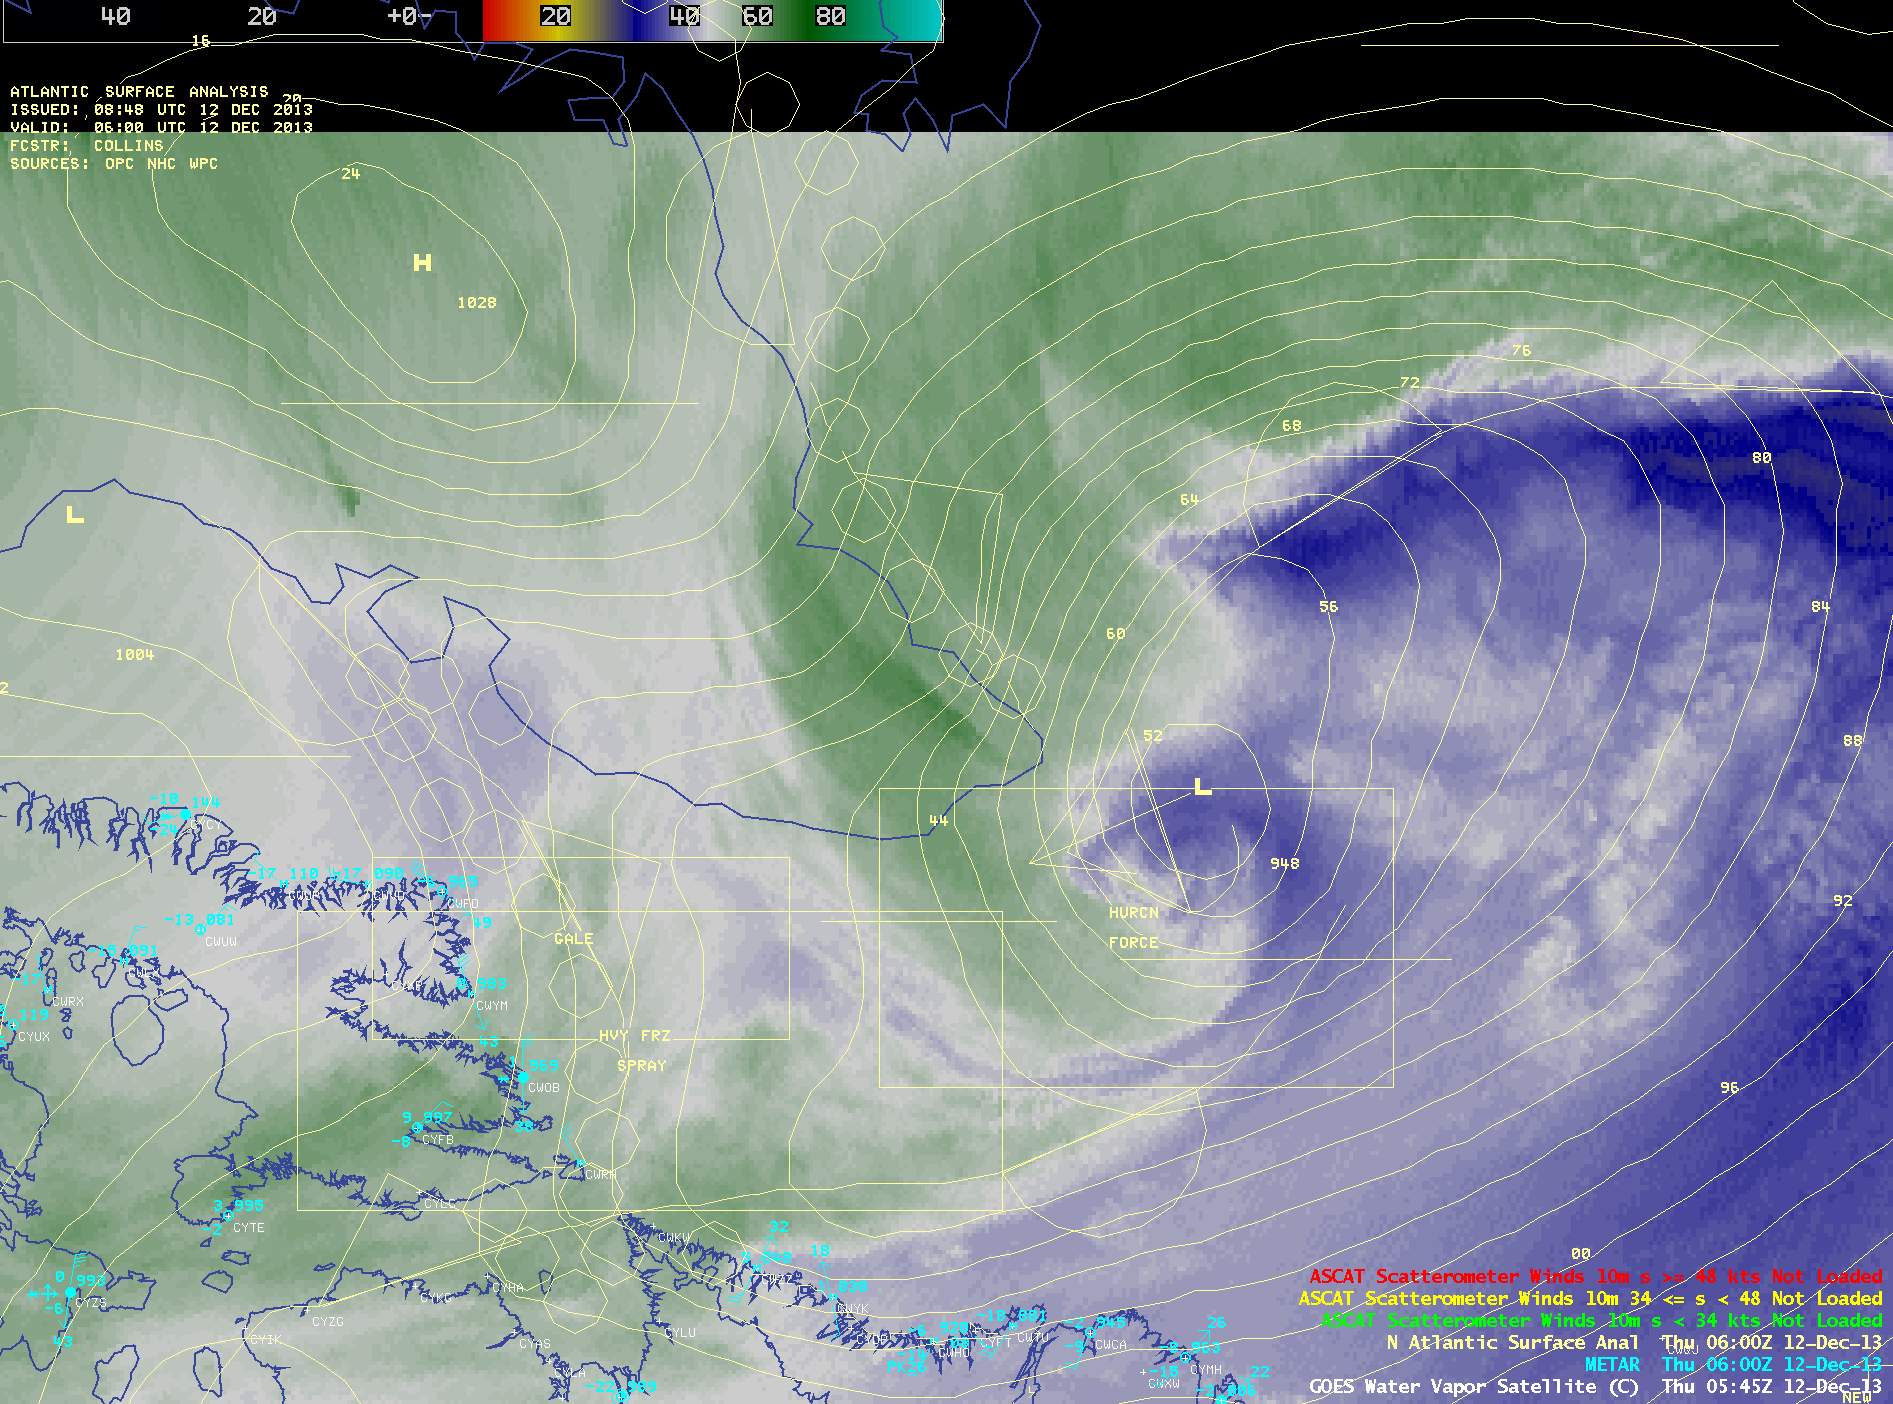 GOES-13 6.5 Âµm water vapor channel images, with surface analysis and METAR surface reports